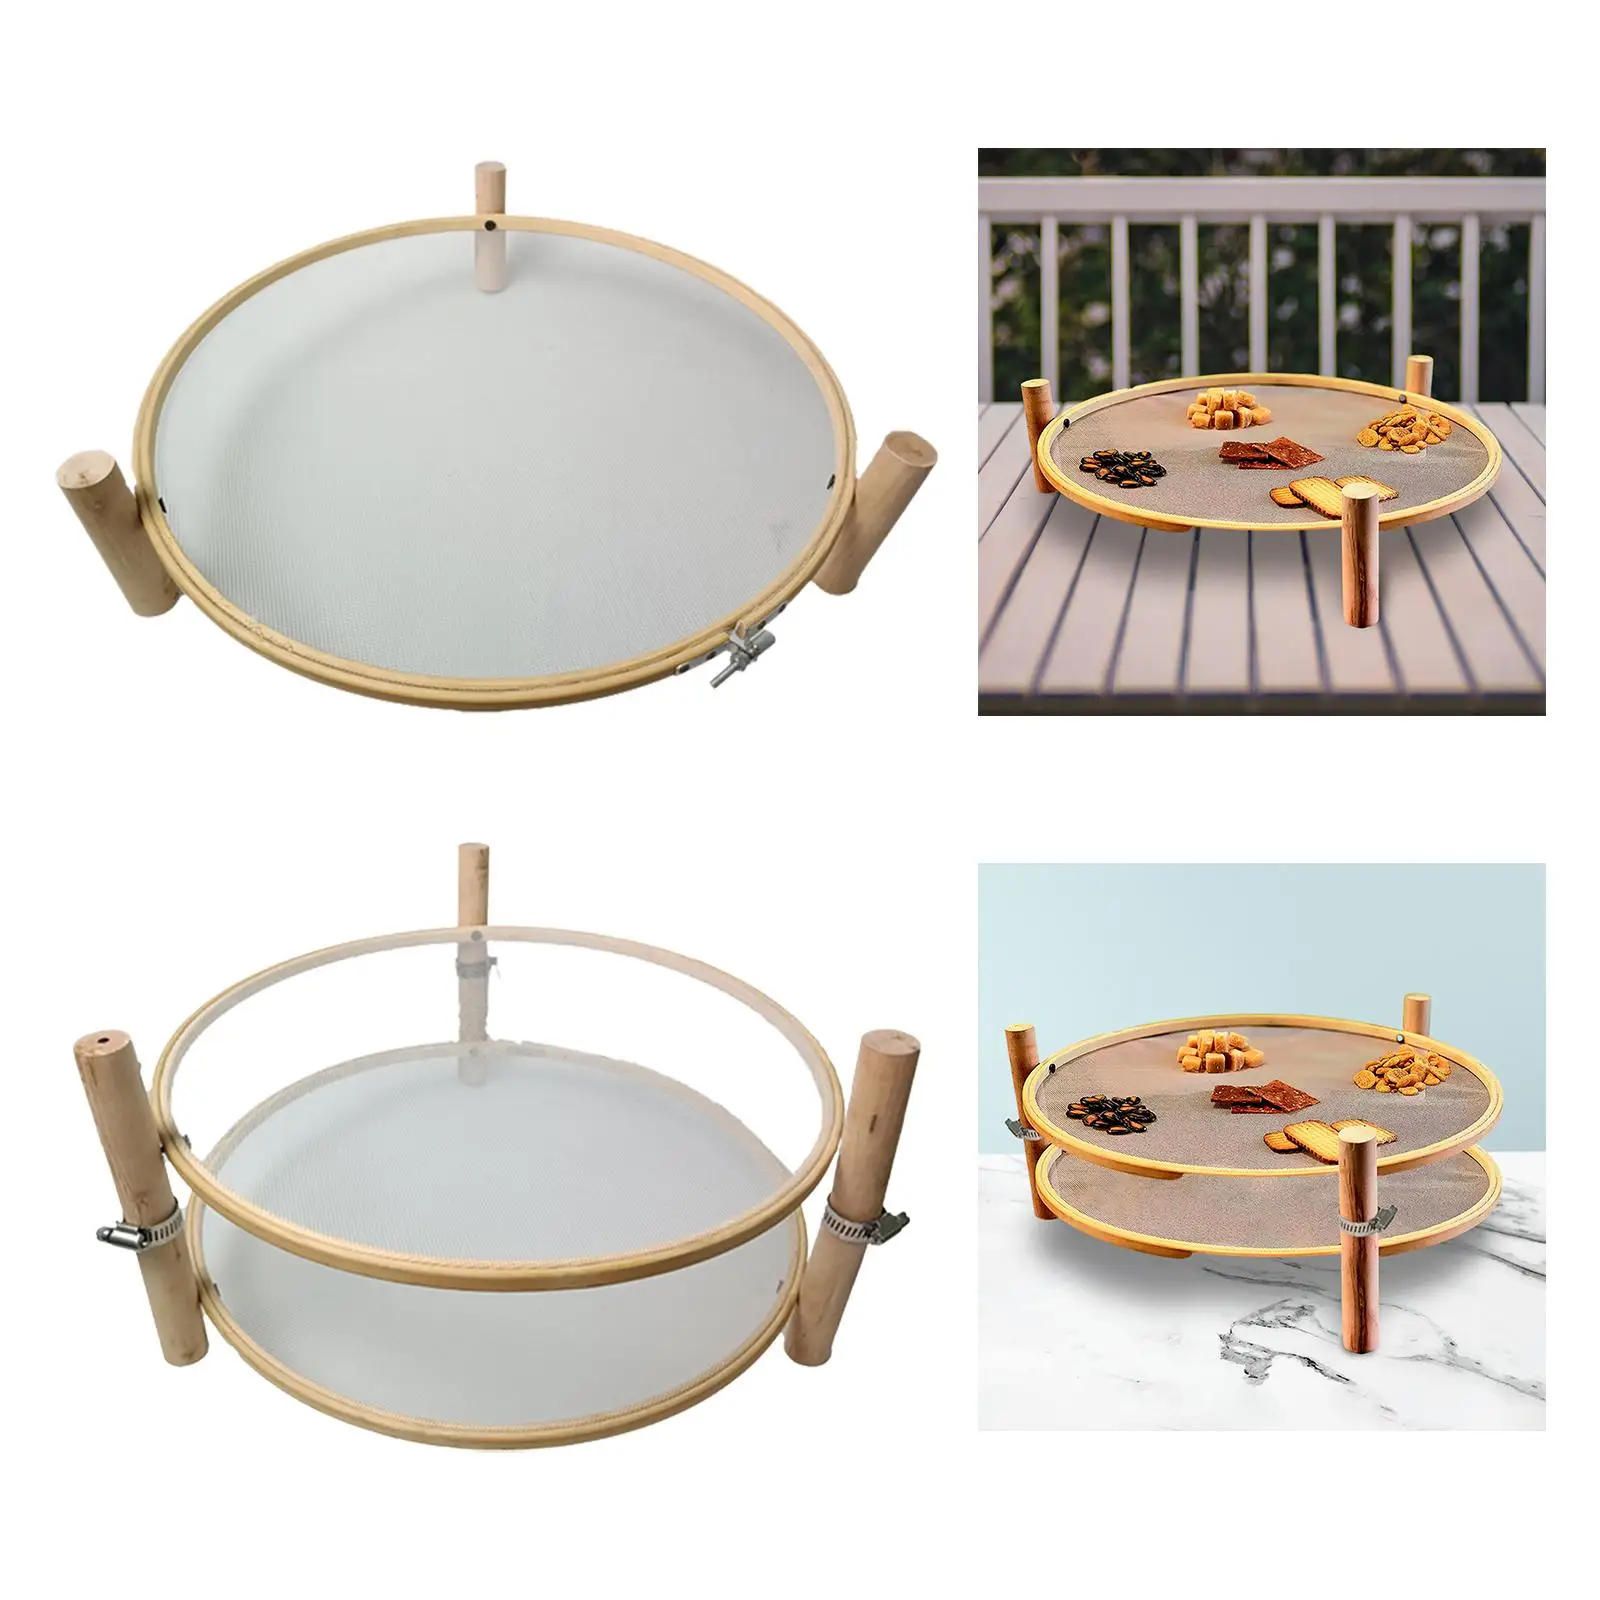 Wood Spaghetti Drying Rack Food Dryer Dehydration Kitchen Gadget for meat Fruits